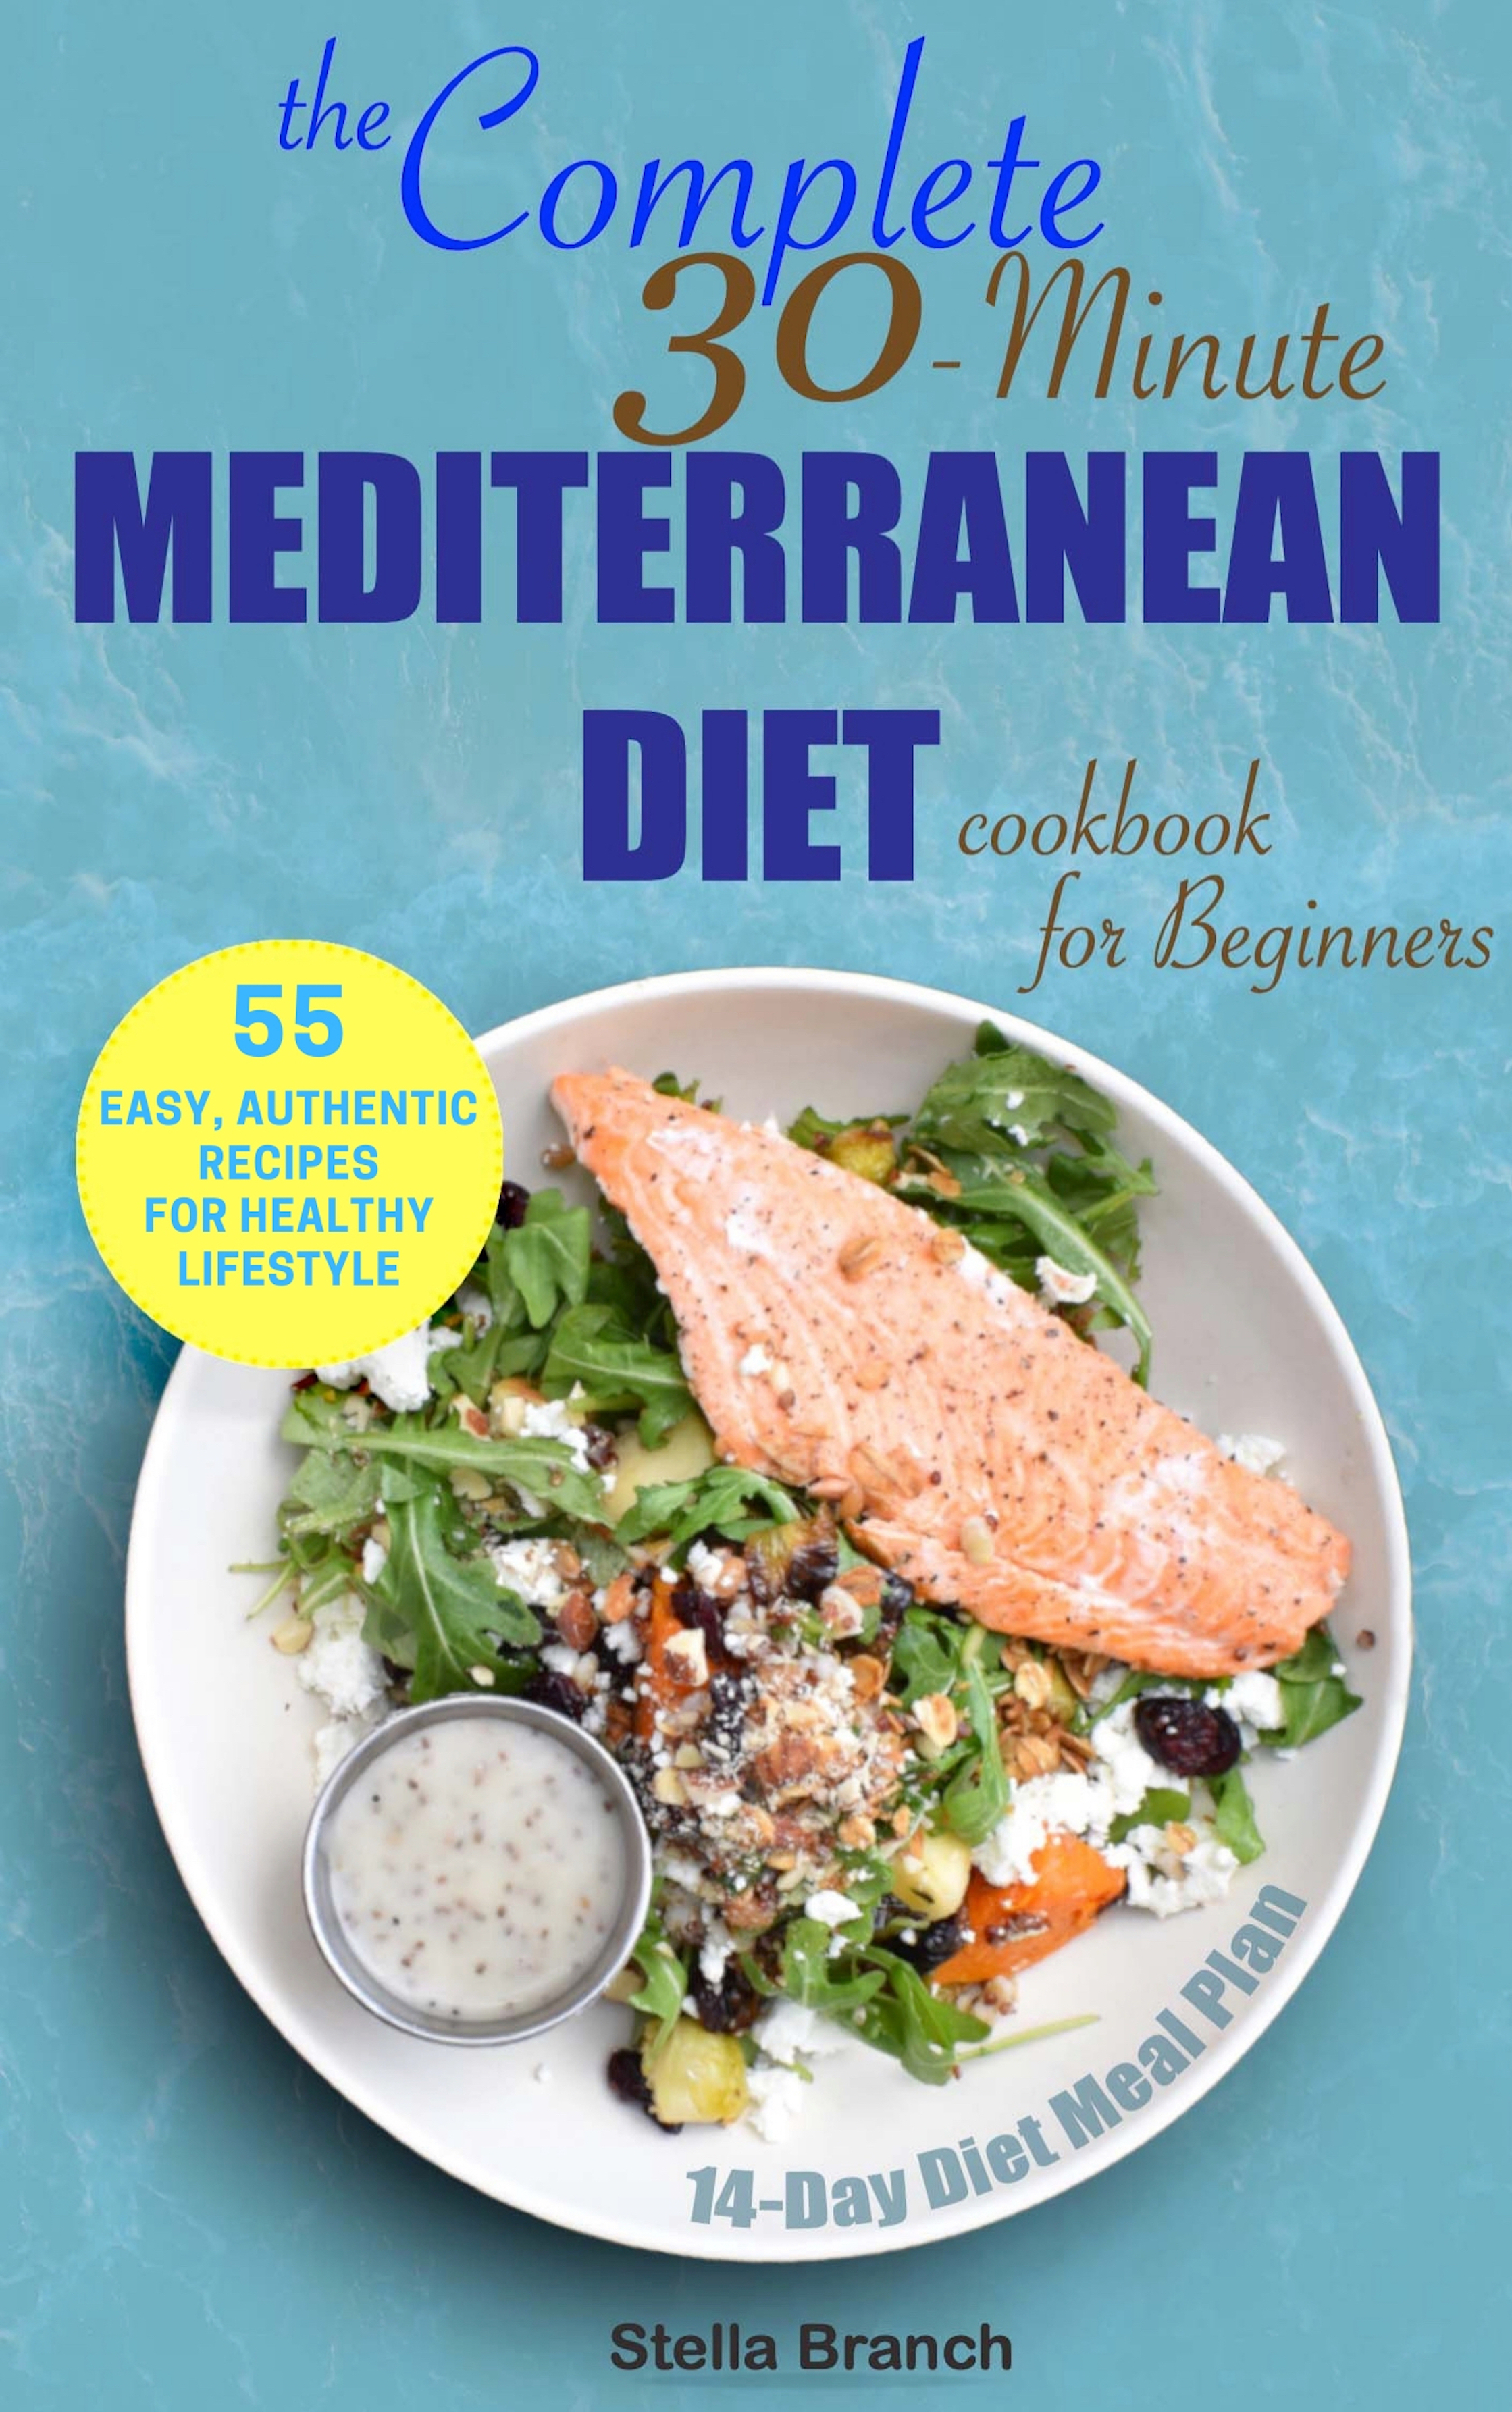 FREE: The Complete 30-Minute Mediterranean Diet Cookbook for Beginners: 55 Easy, Authentic Recipes for Healthy Lifestyle by STELLA BRANCH